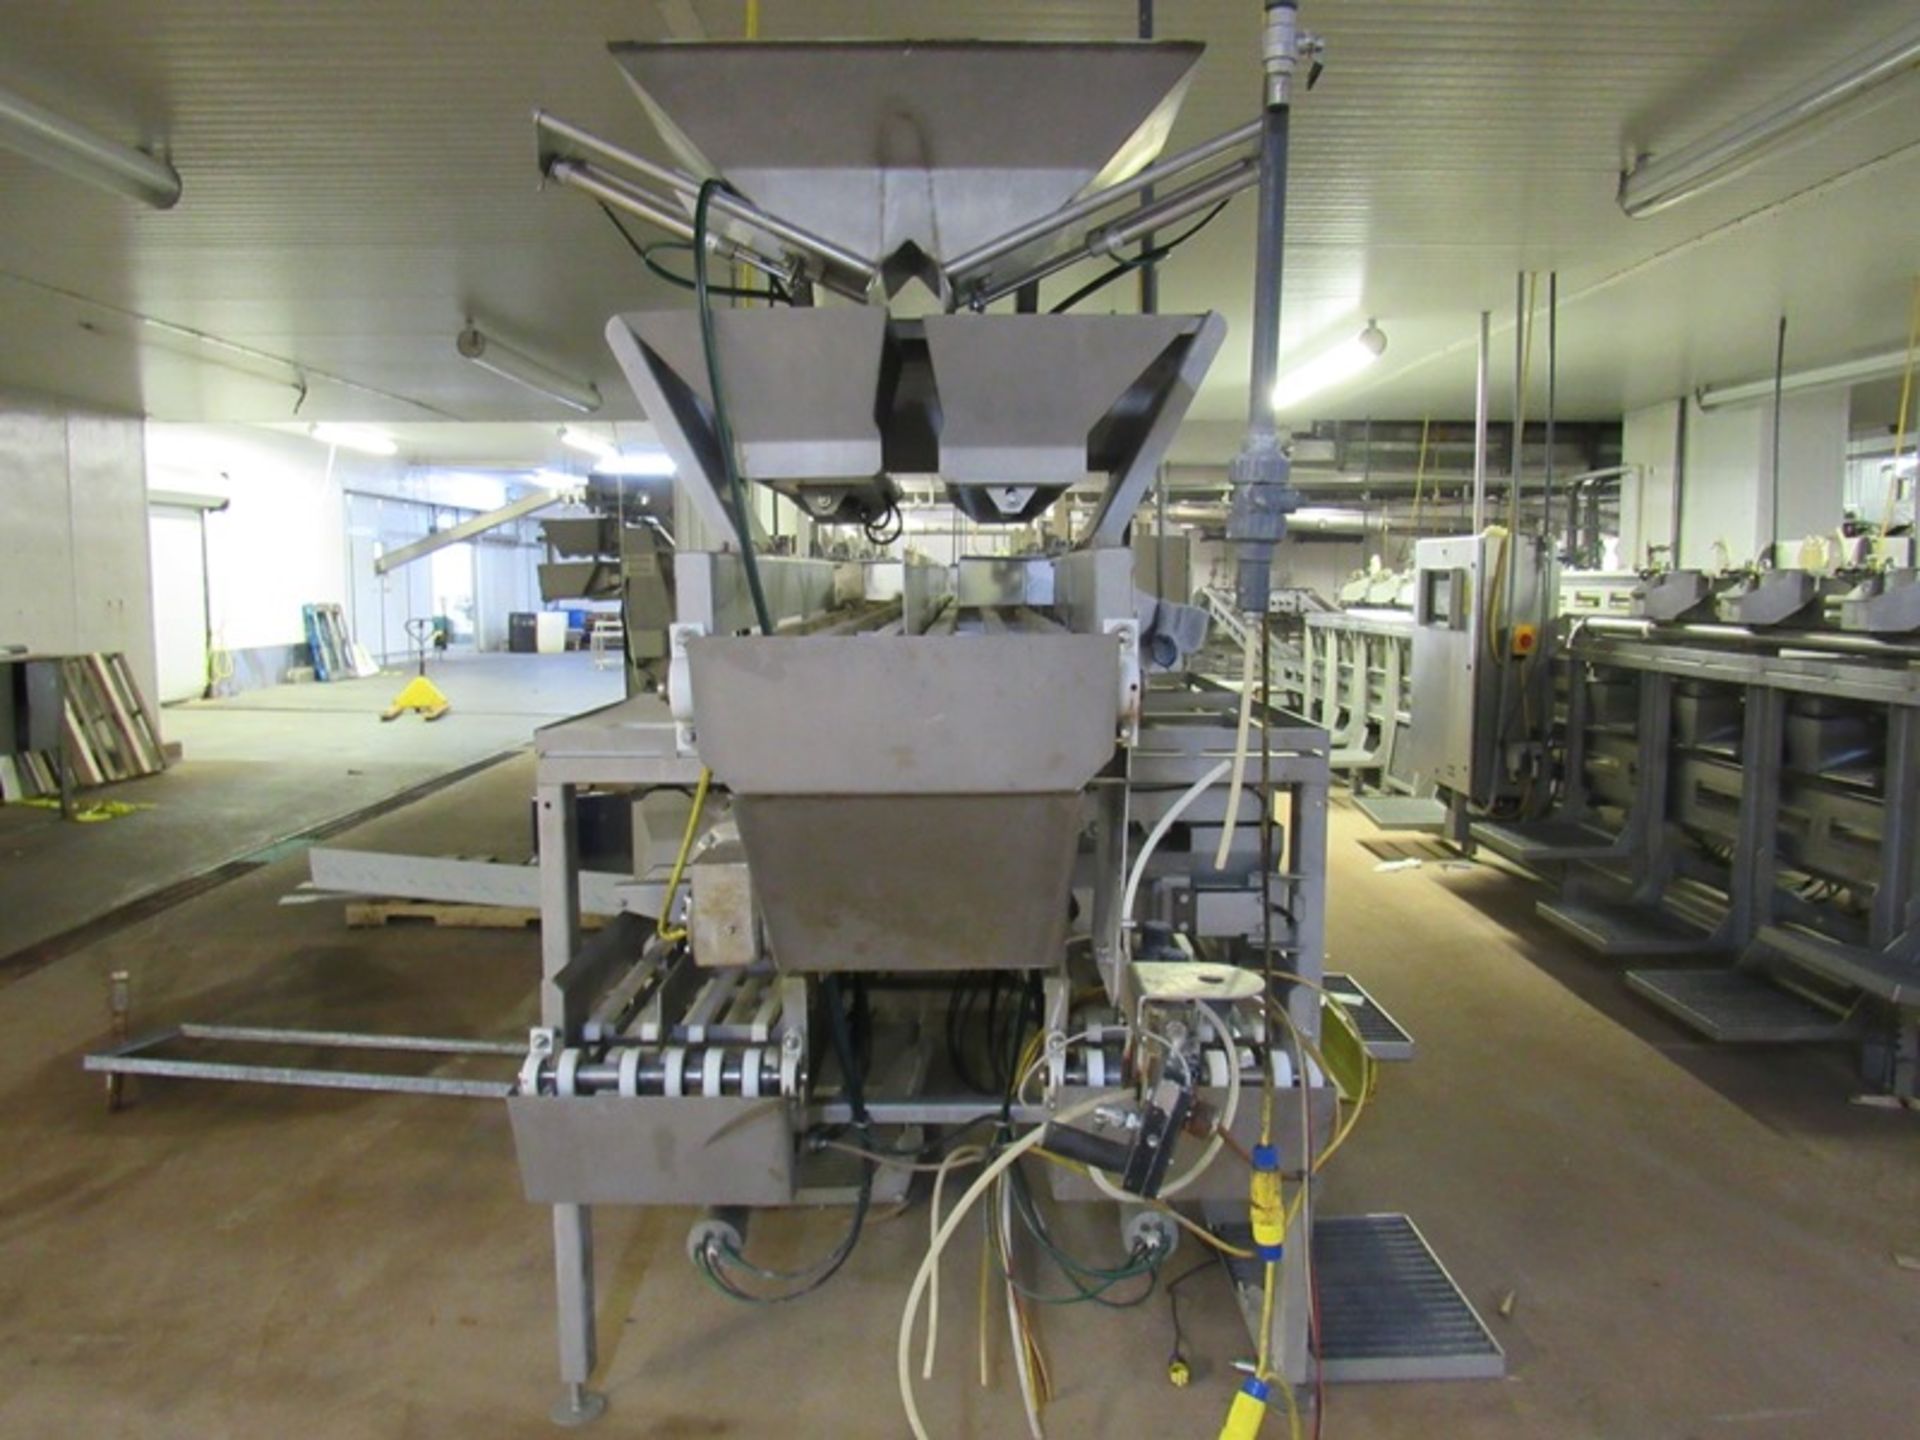 C.A.T. Stainless Steel Grading Line, dual lanes, 10 positions per lane, pneumatic drop chutes, - Image 3 of 22